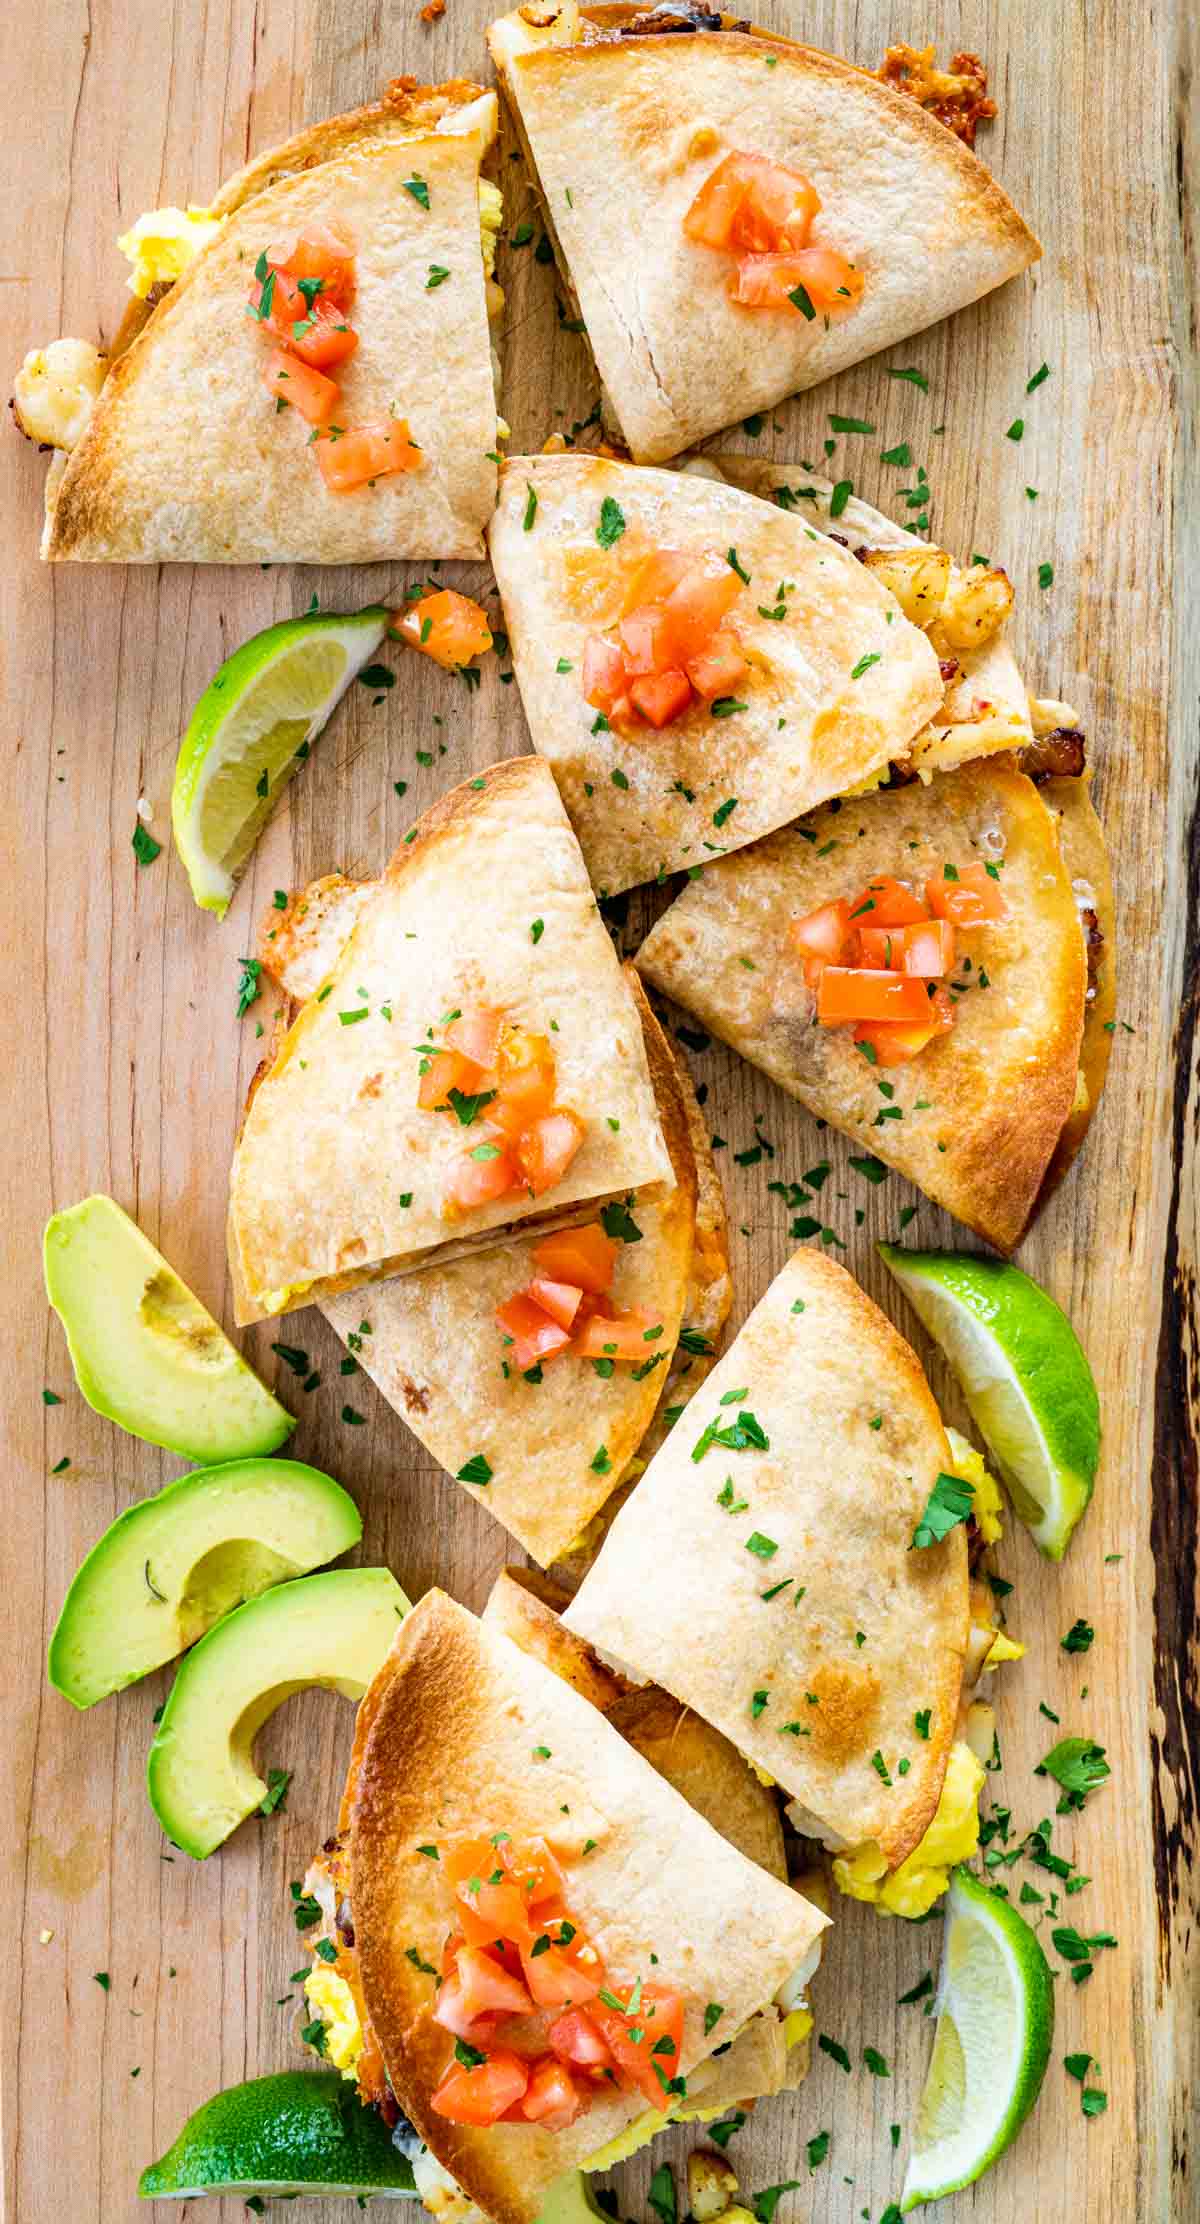 breakfast quesadillas cut in pieces on a cutting board garnished with tomatoes and avocados.